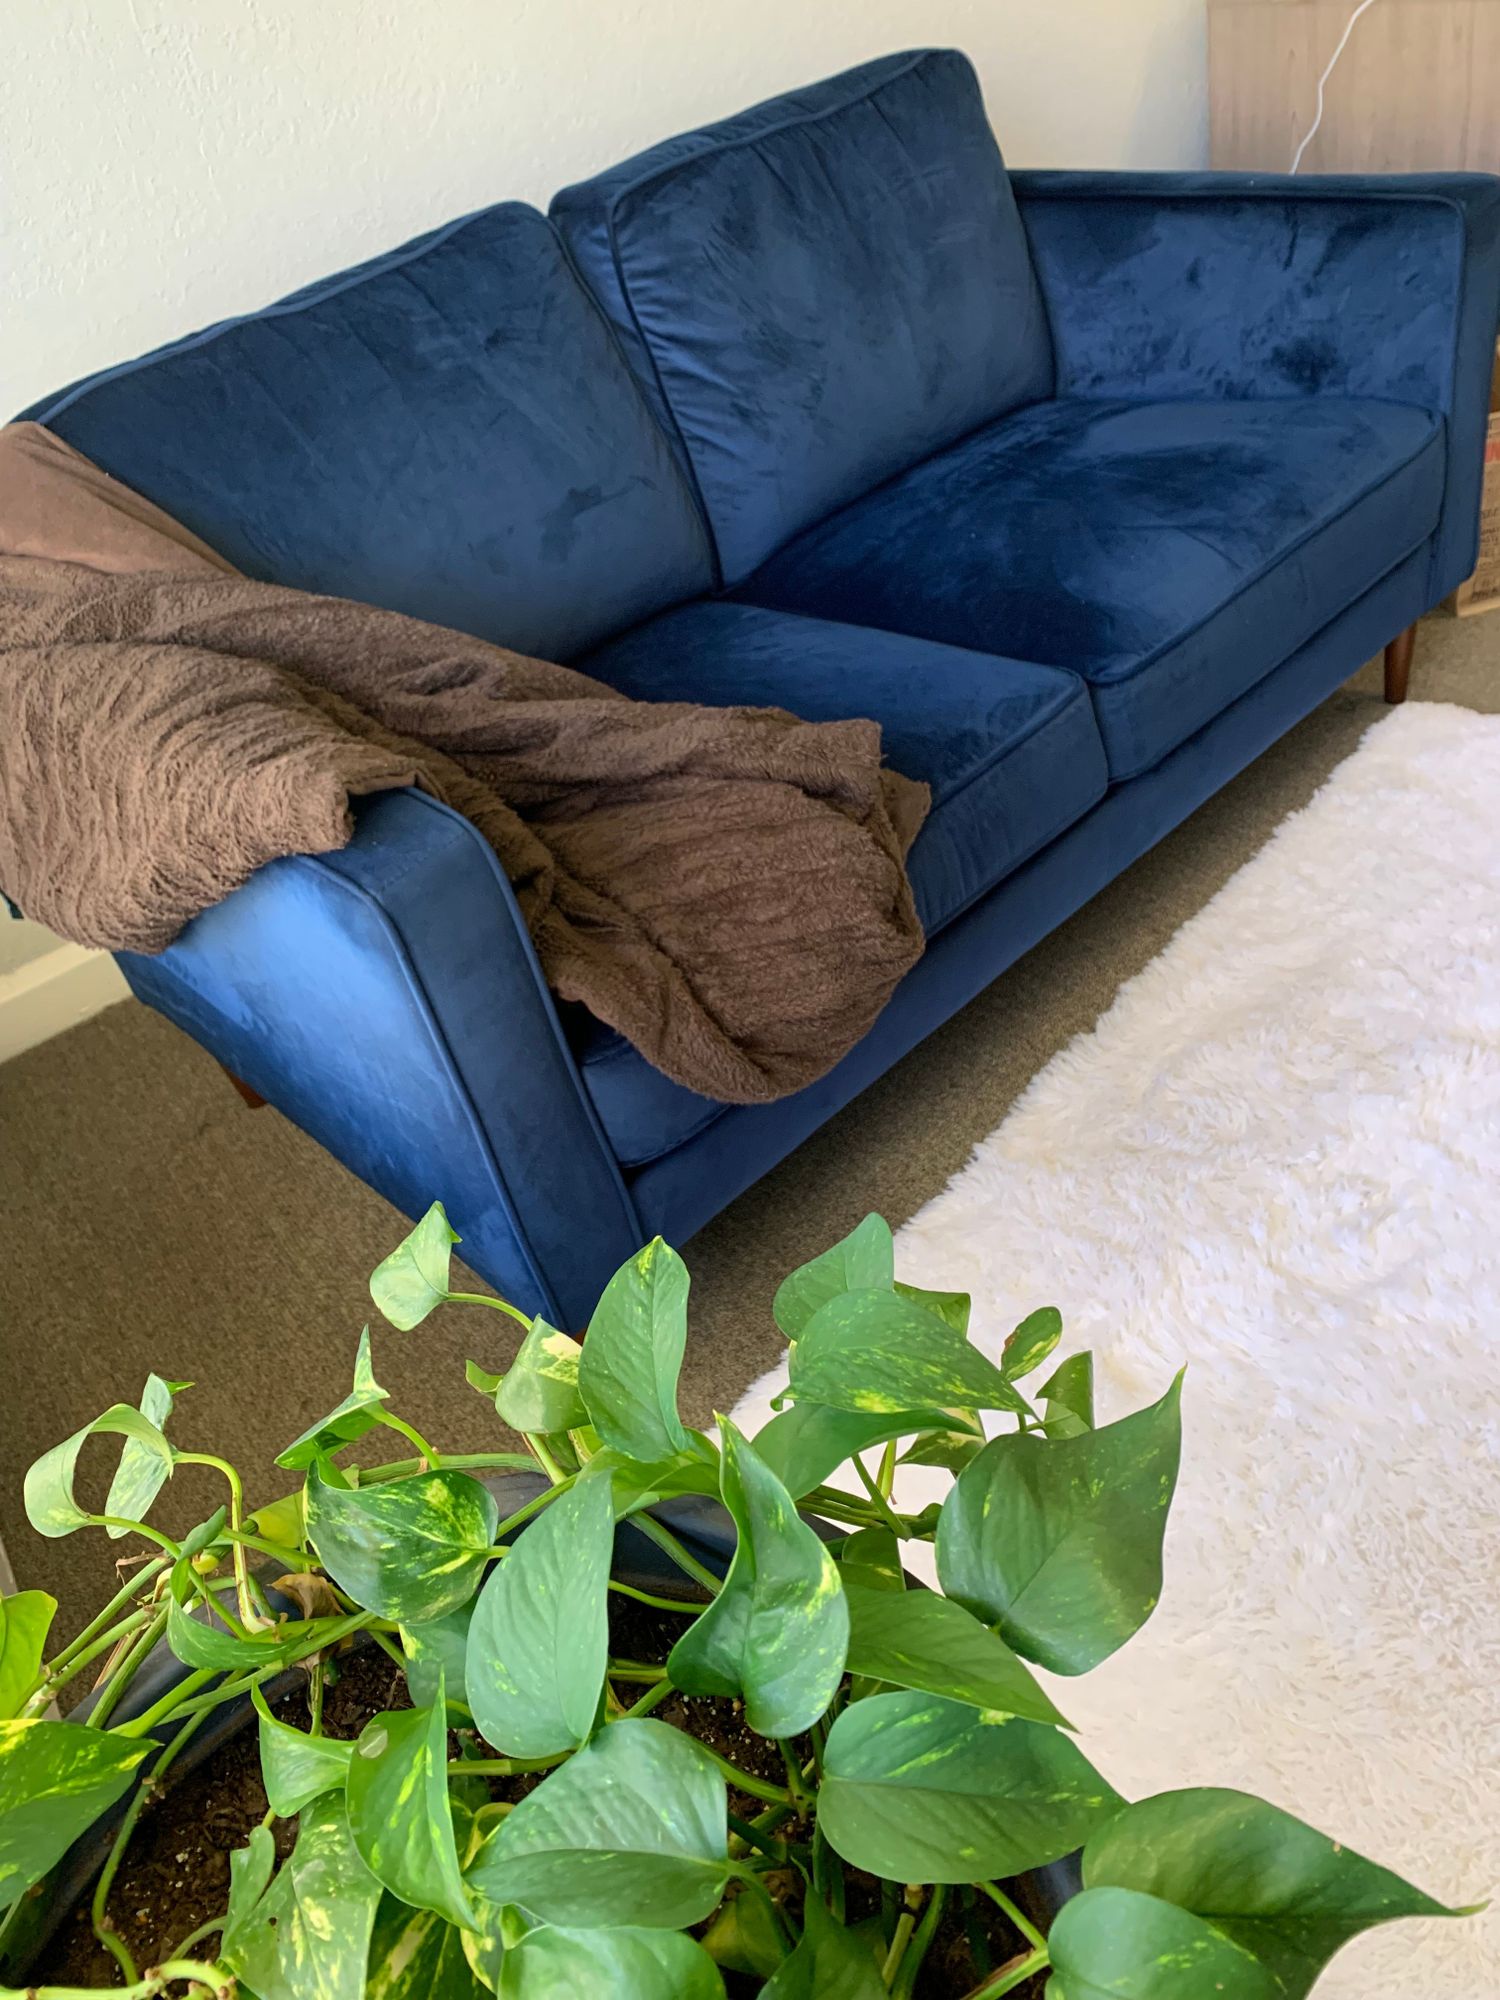 Gallery Photo of My favorite spot in my office.  The blue sofa.  No matter our challenges or difficulties. We should all have a safe space to share our deepest selves.